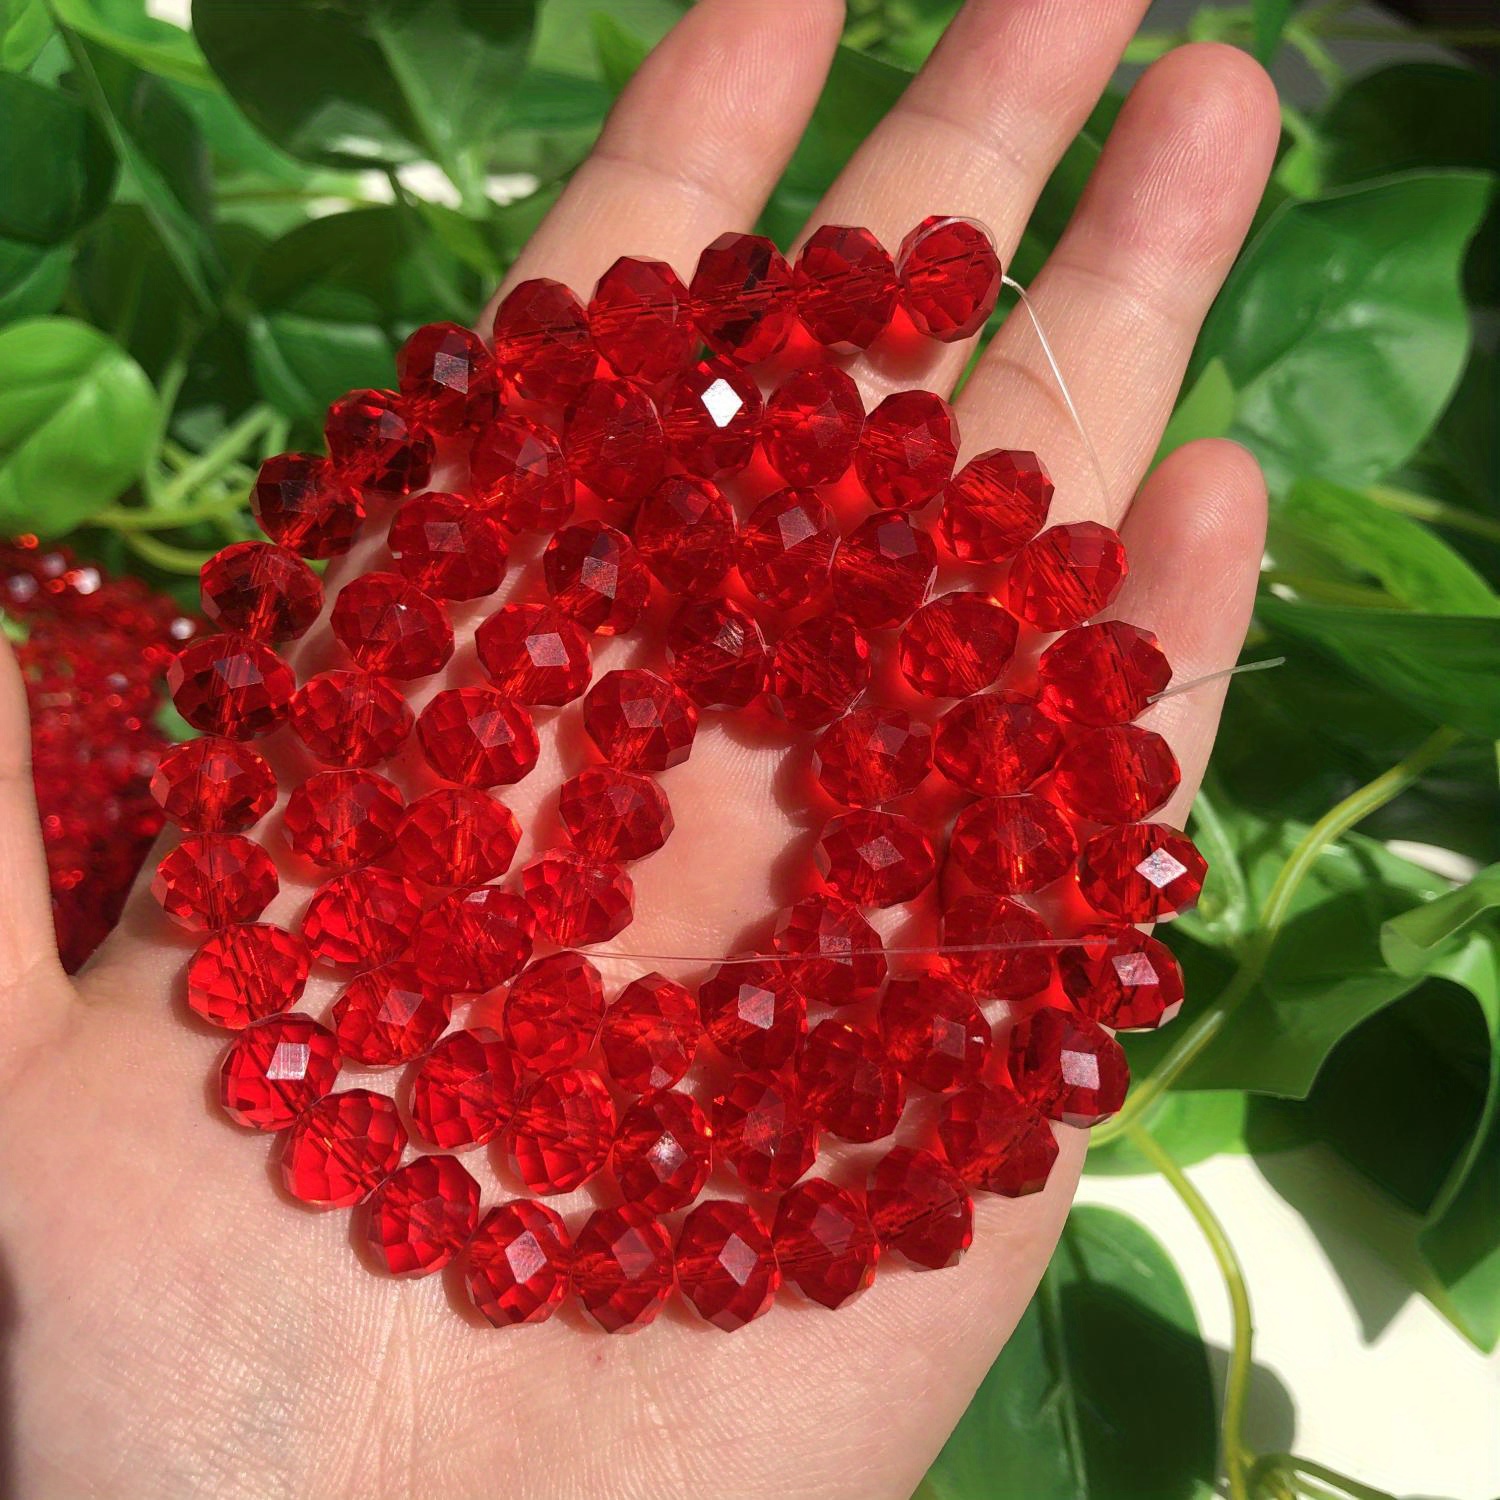 10 Strands 4mm Rondelle Crystal Glass Beads, Micro 48 Faceted Tiny Glass  Beads Diamond Cut Gemstone Strand Loose Beads Sparkly Beads for DIY Jewelry